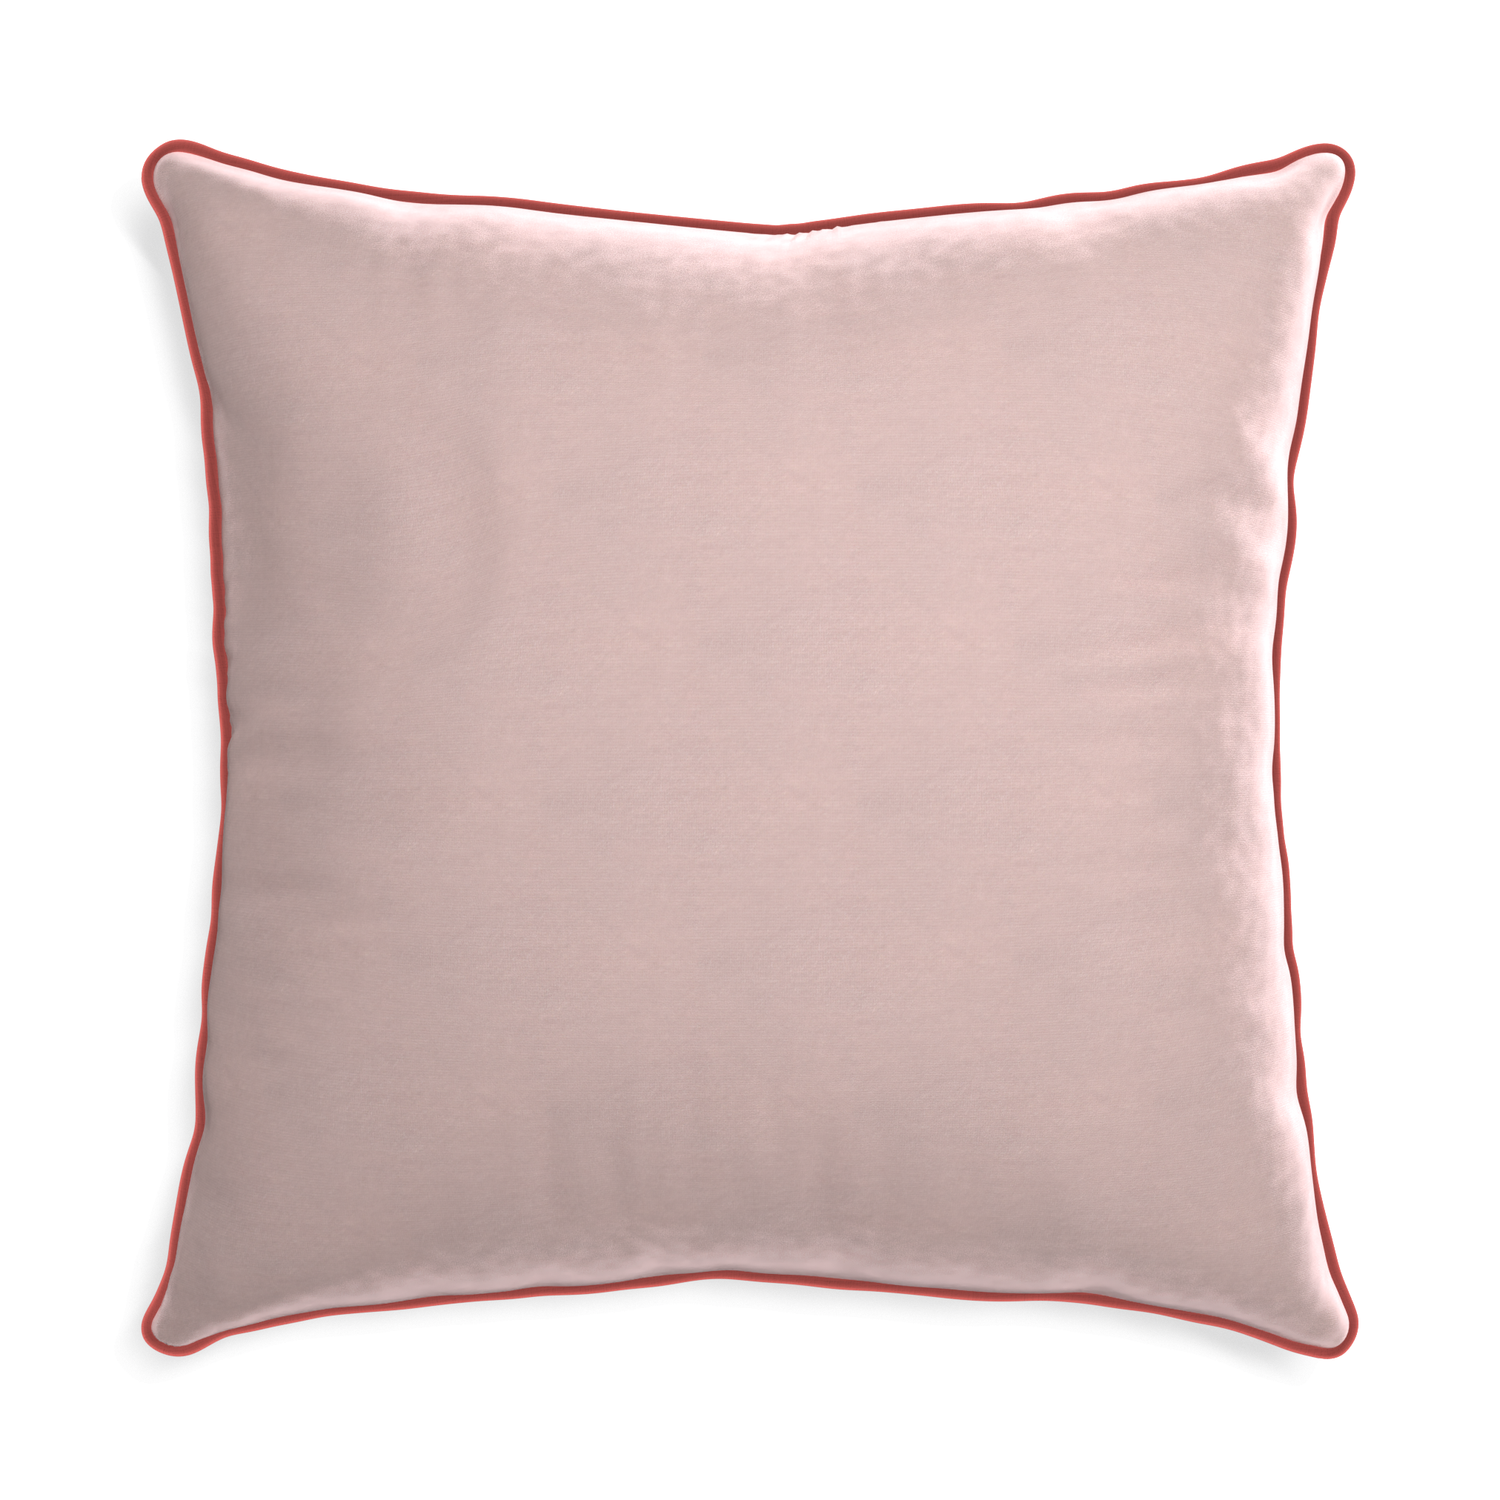 square light pink velvet pillow with coral piping